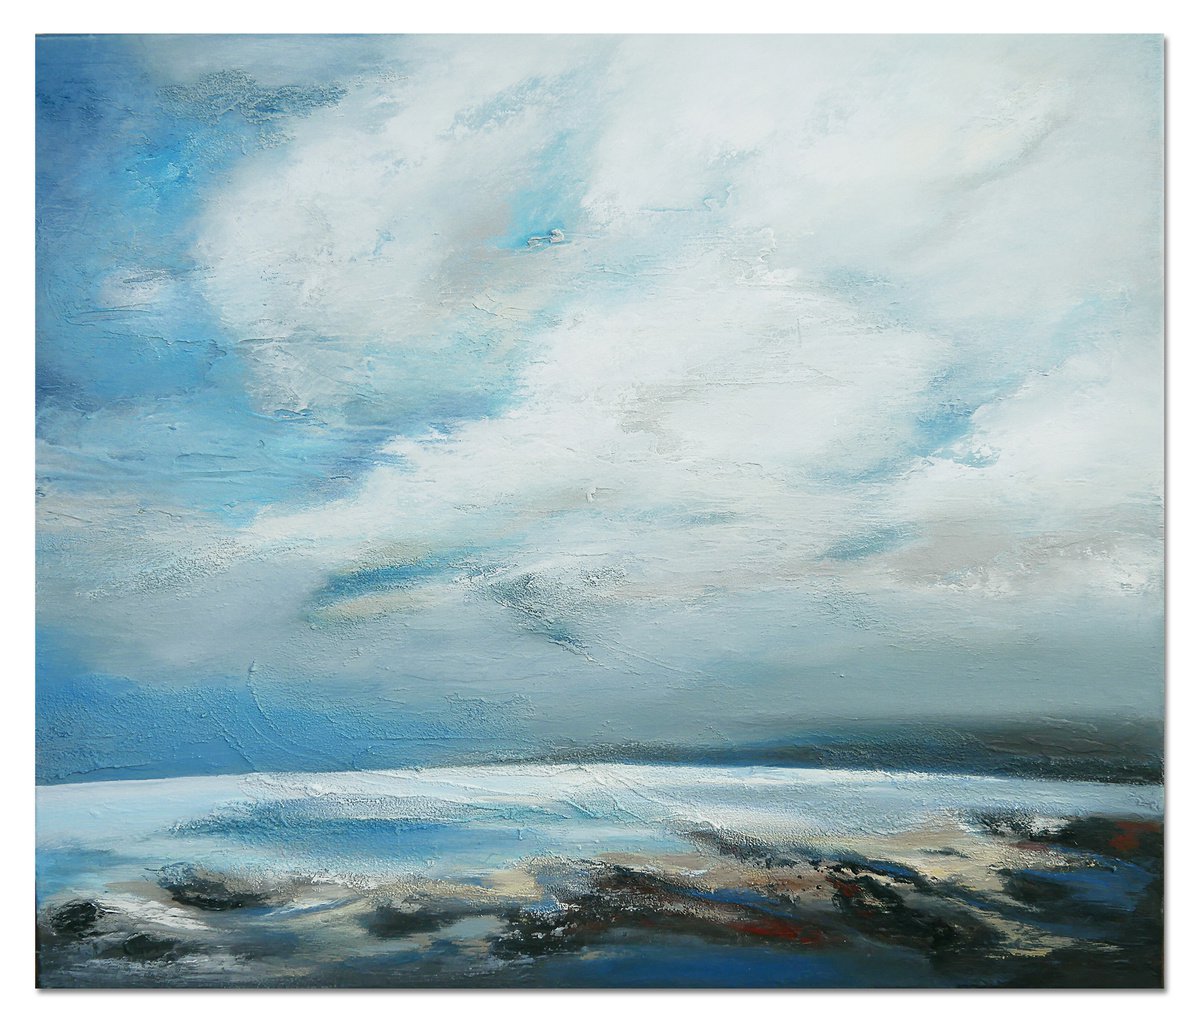 A large seascape painting Sea Air by Olesia Grygoruk